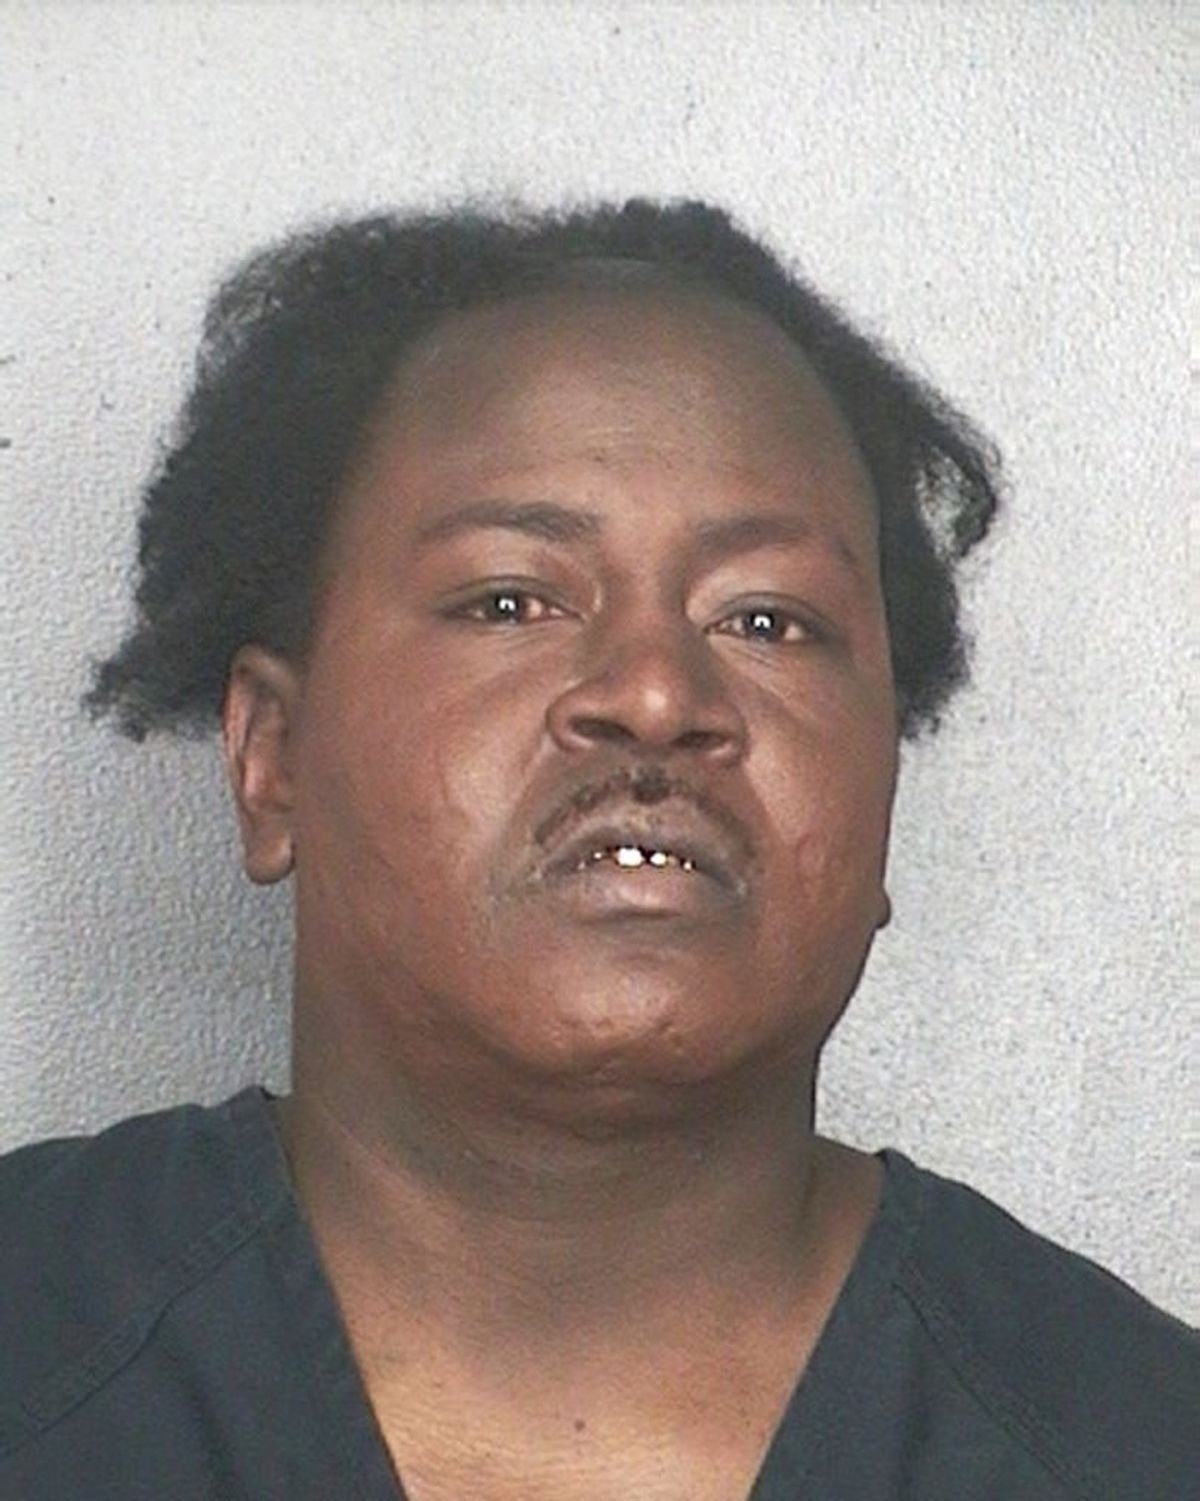 Trick Daddy's Disgusting Comments Against Black Women